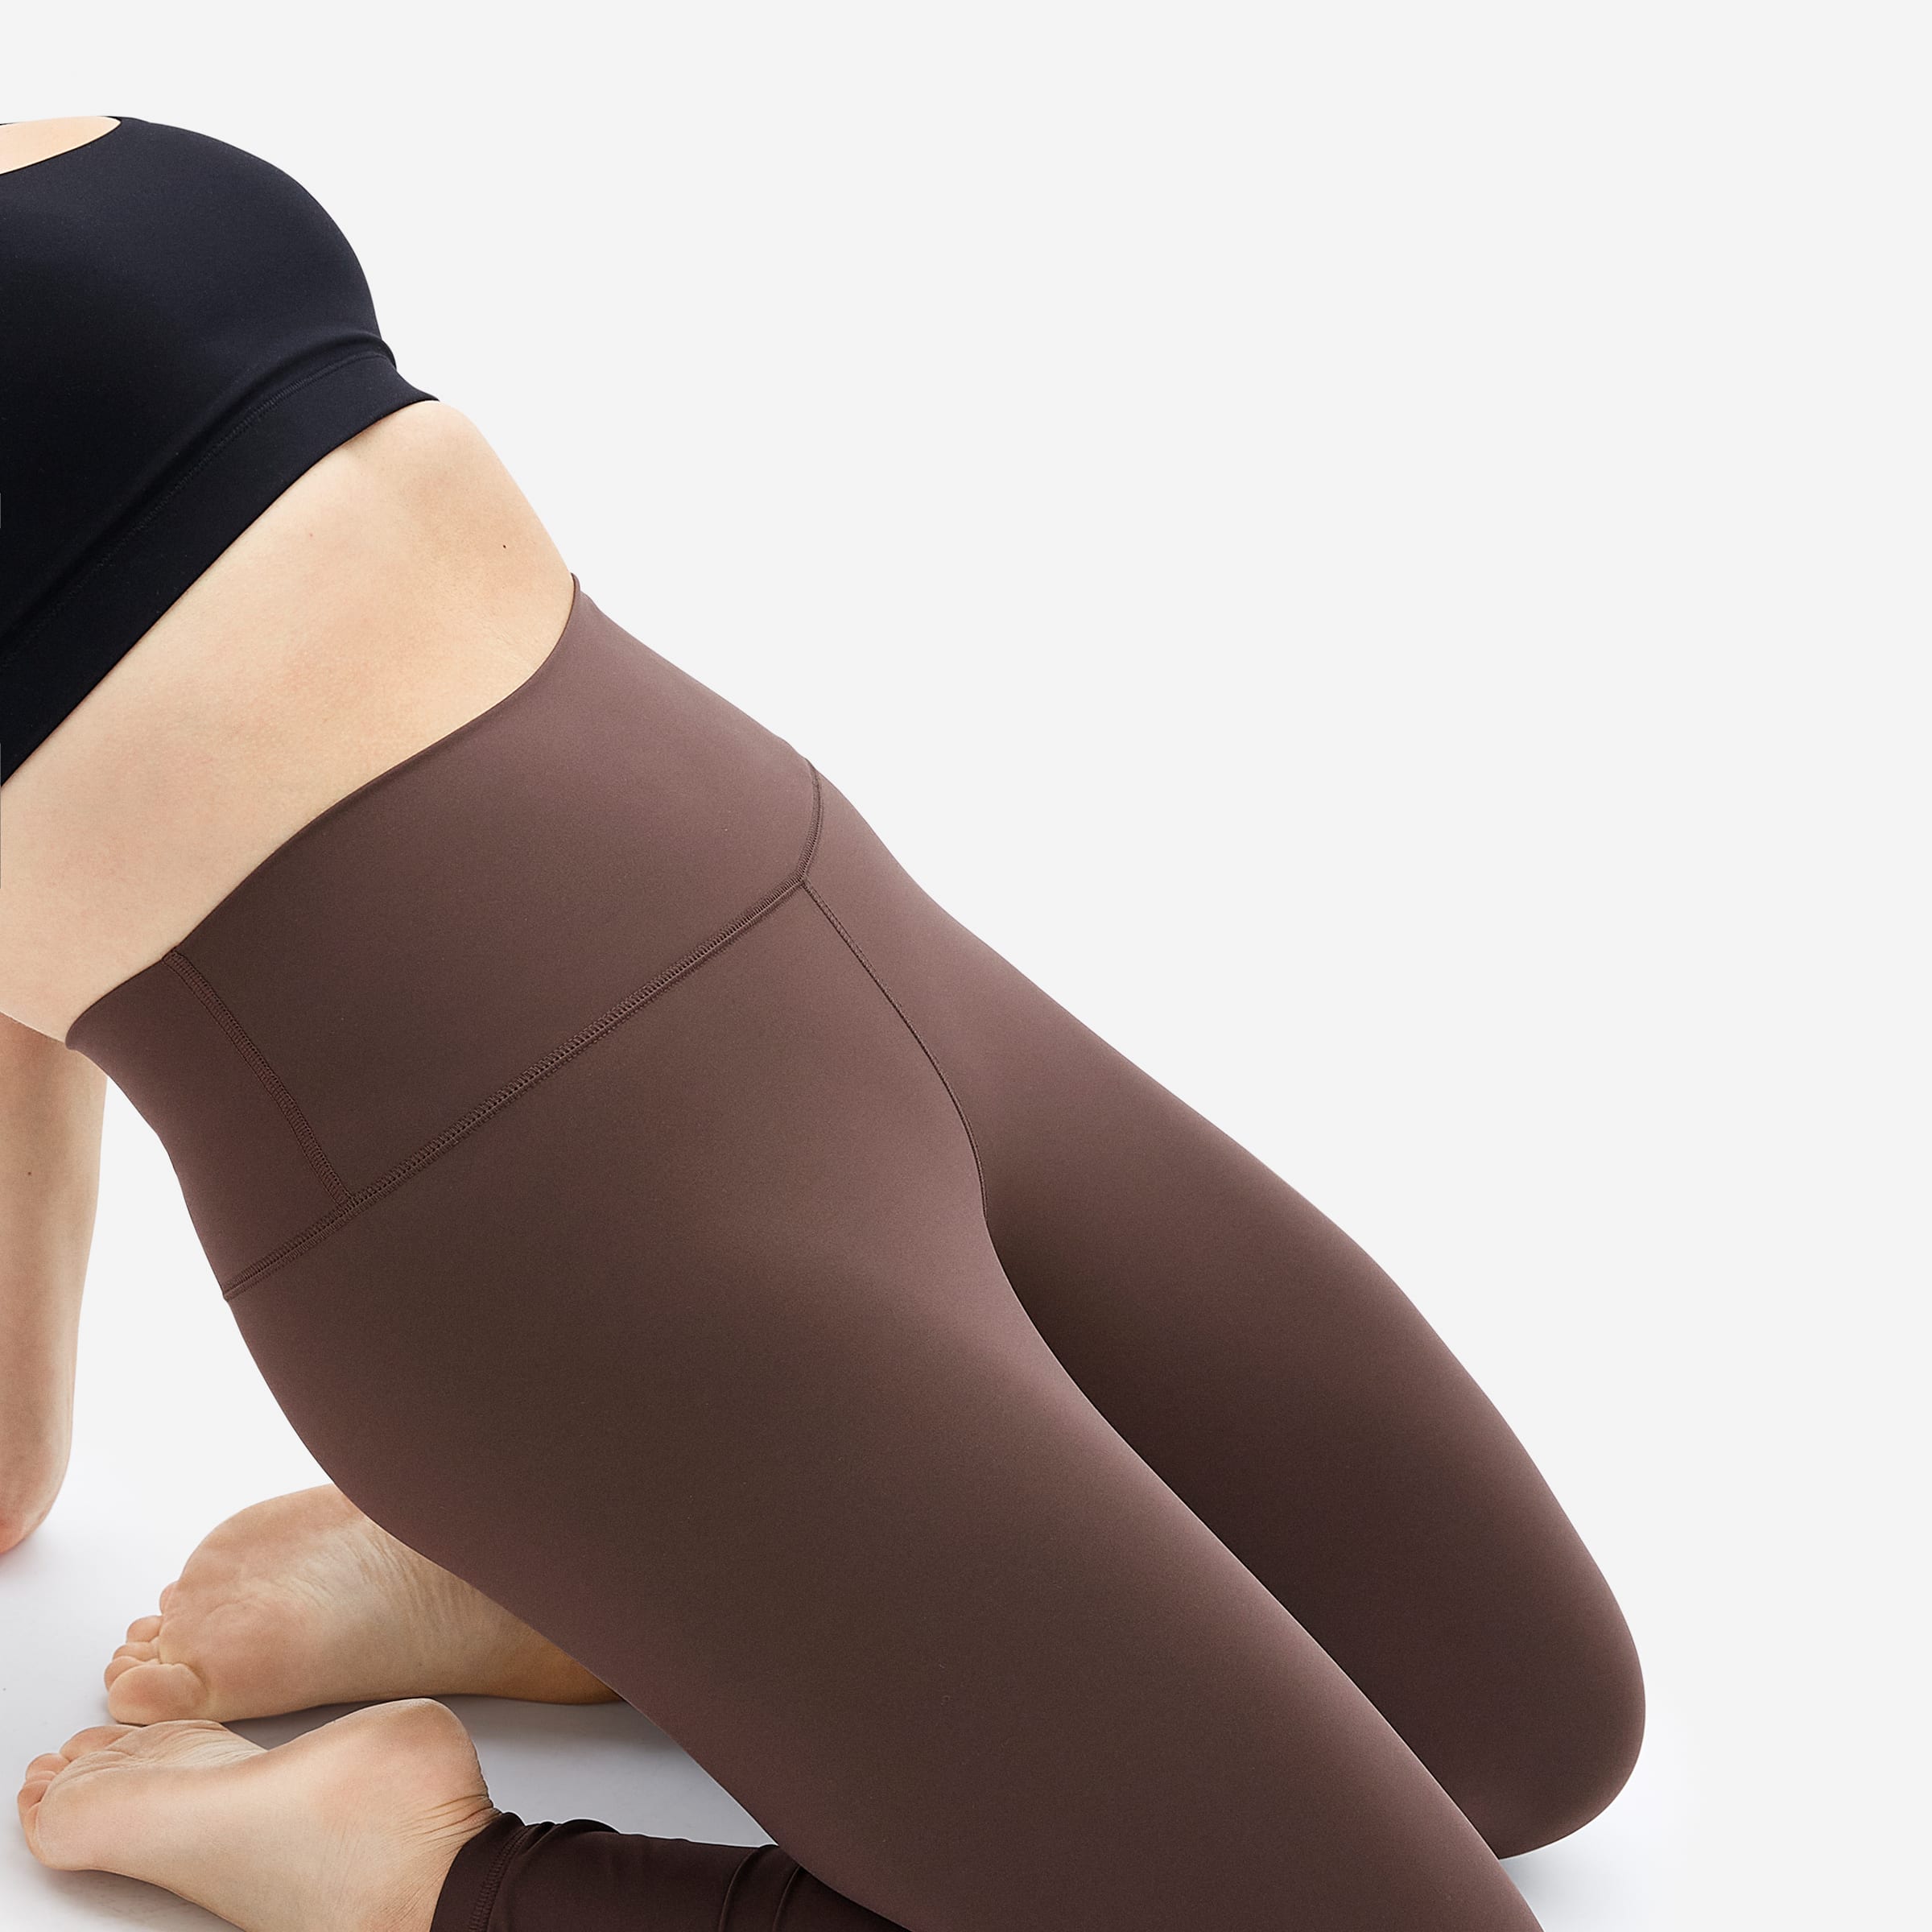 Everlane Perform Leggings Review: 7 Women Give Their Takes